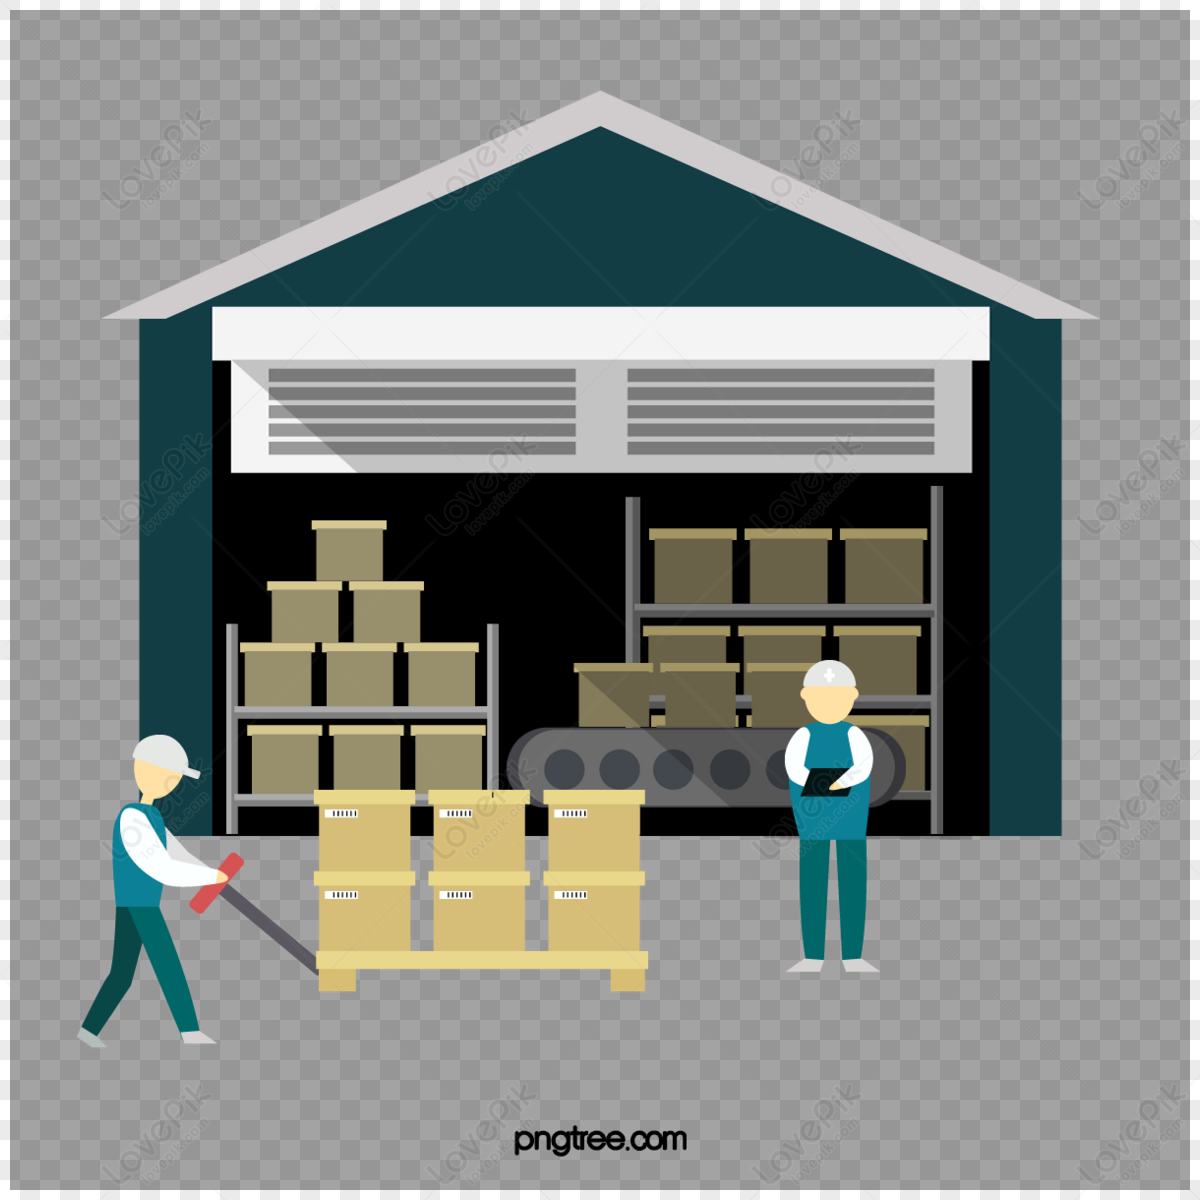 The Warehouse logo, Vector Logo of The Warehouse brand free download (eps,  ai, png, cdr) formats